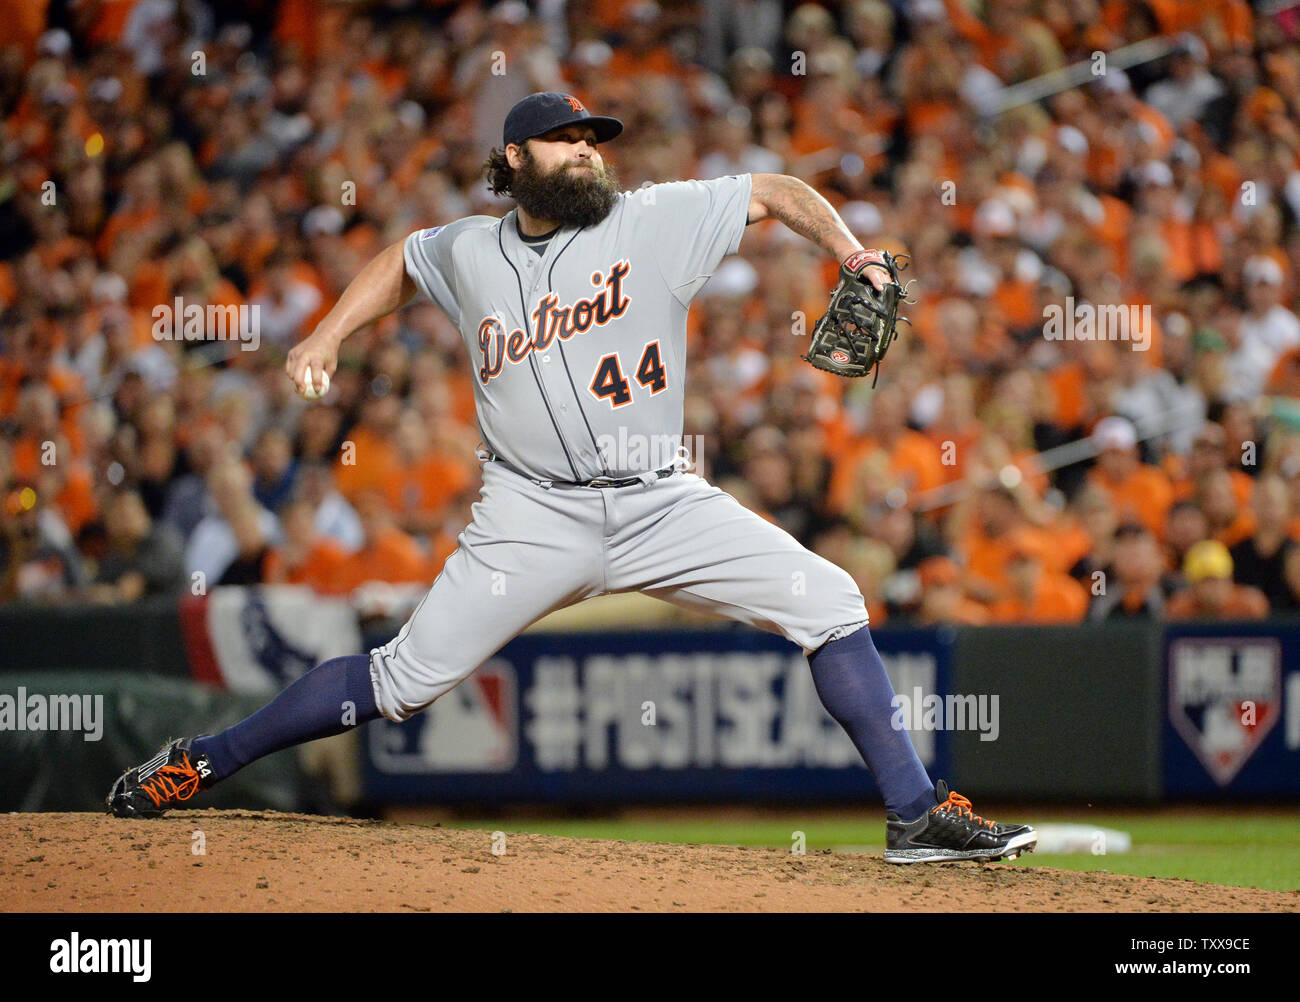 Detroit Tigers relief pitcher Joba Chamberlain delivers during the eighth inning of game 1 of the American League Division Series against the Baltimore Orioles at Orioles Park at Camden Yards in Baltimore, Maryland on October 2, 2014.     UPI/Kevin Dietsch Stock Photo